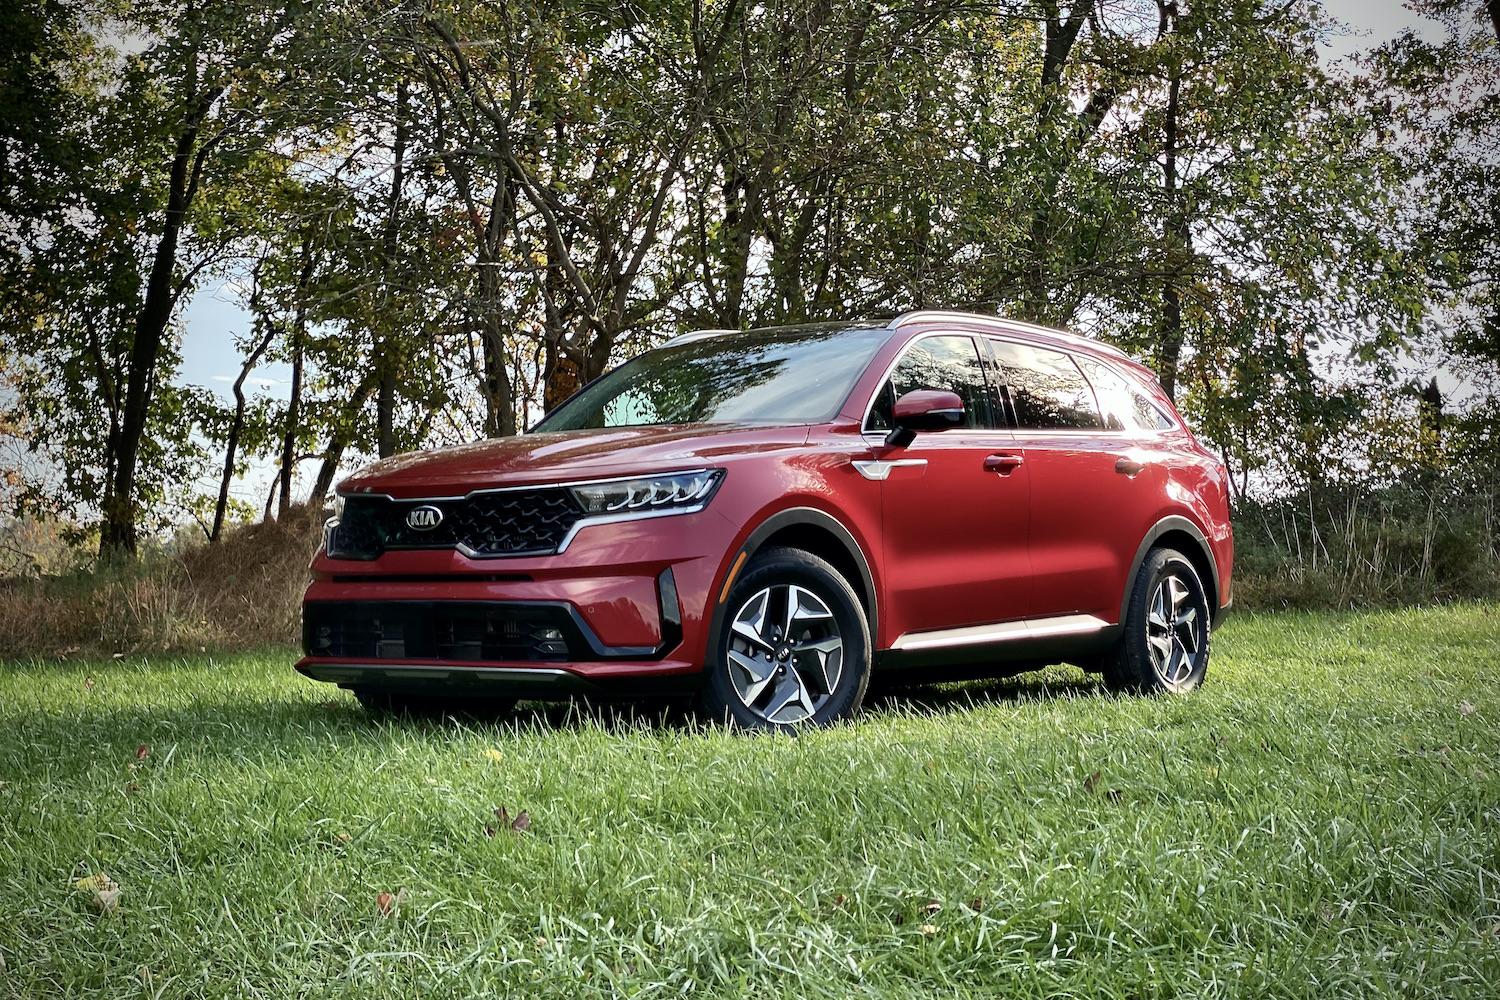 Front end of the 2021 Kia Sorento Hybrid from the driver's side in a grassy field.